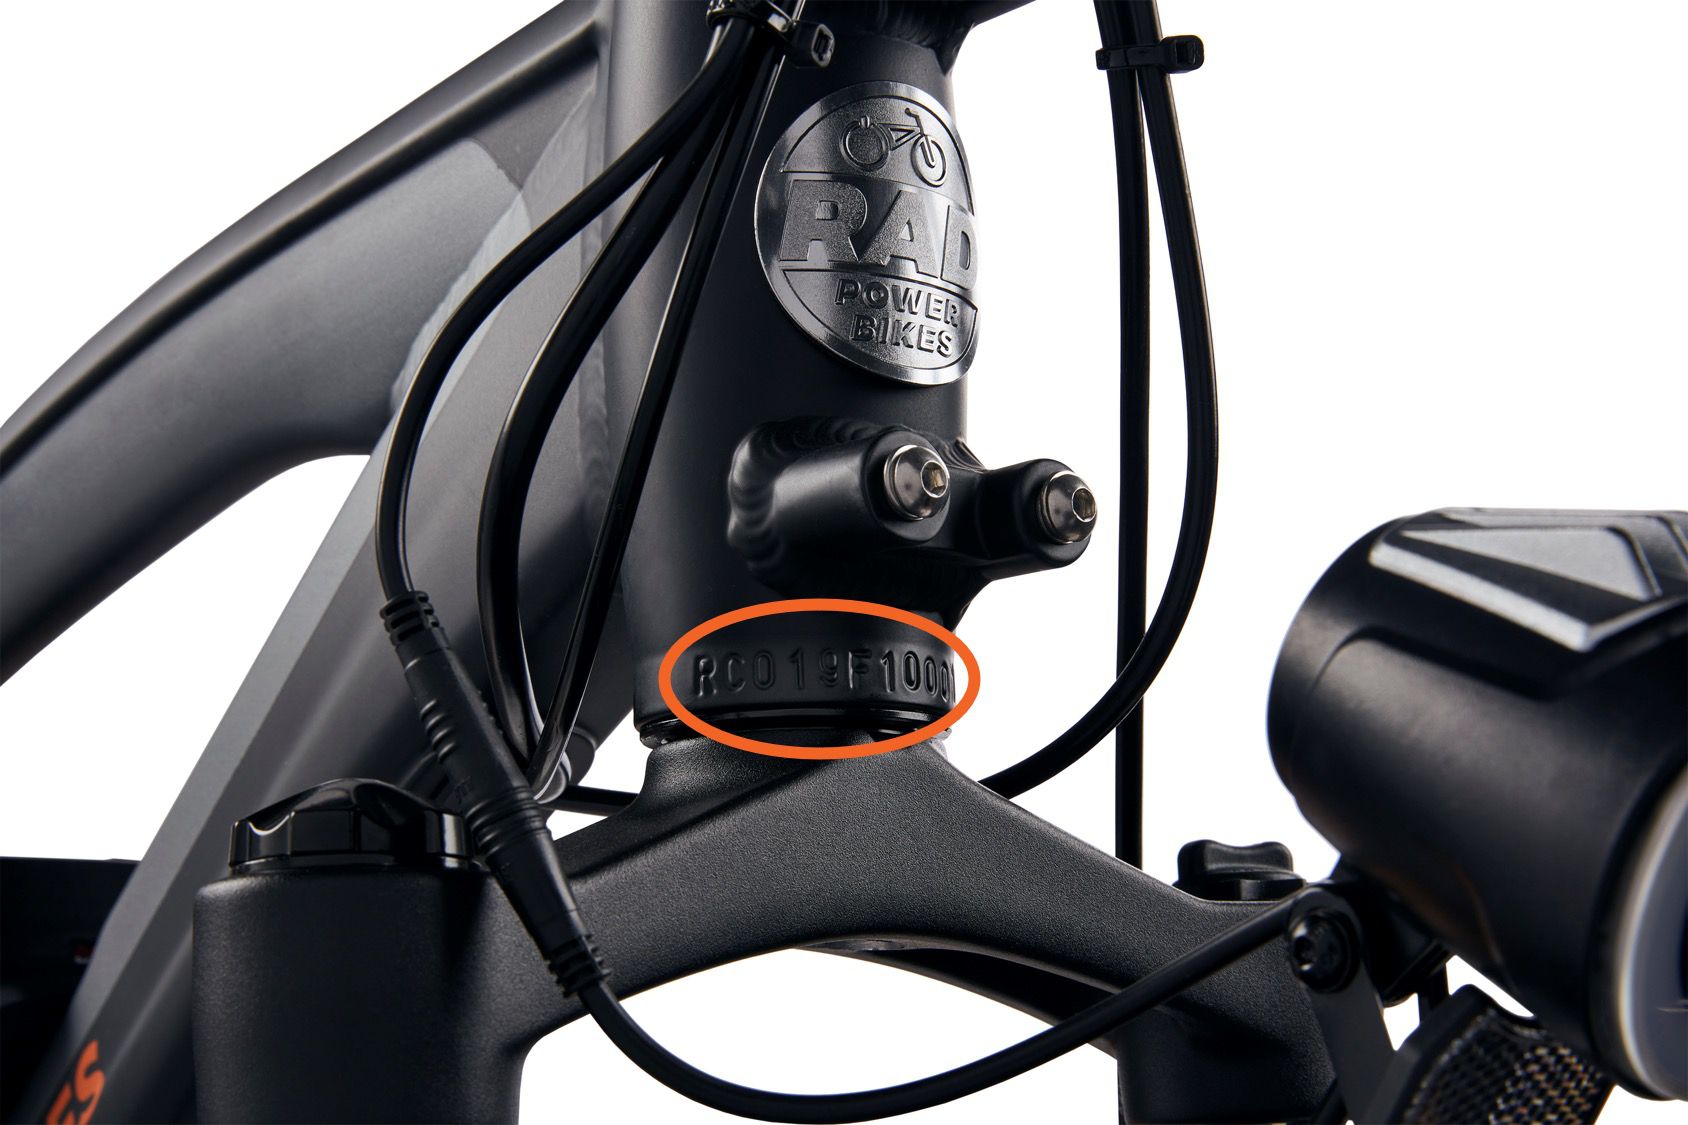 Rad Power Bikes eBike stock image with highlighted serial number